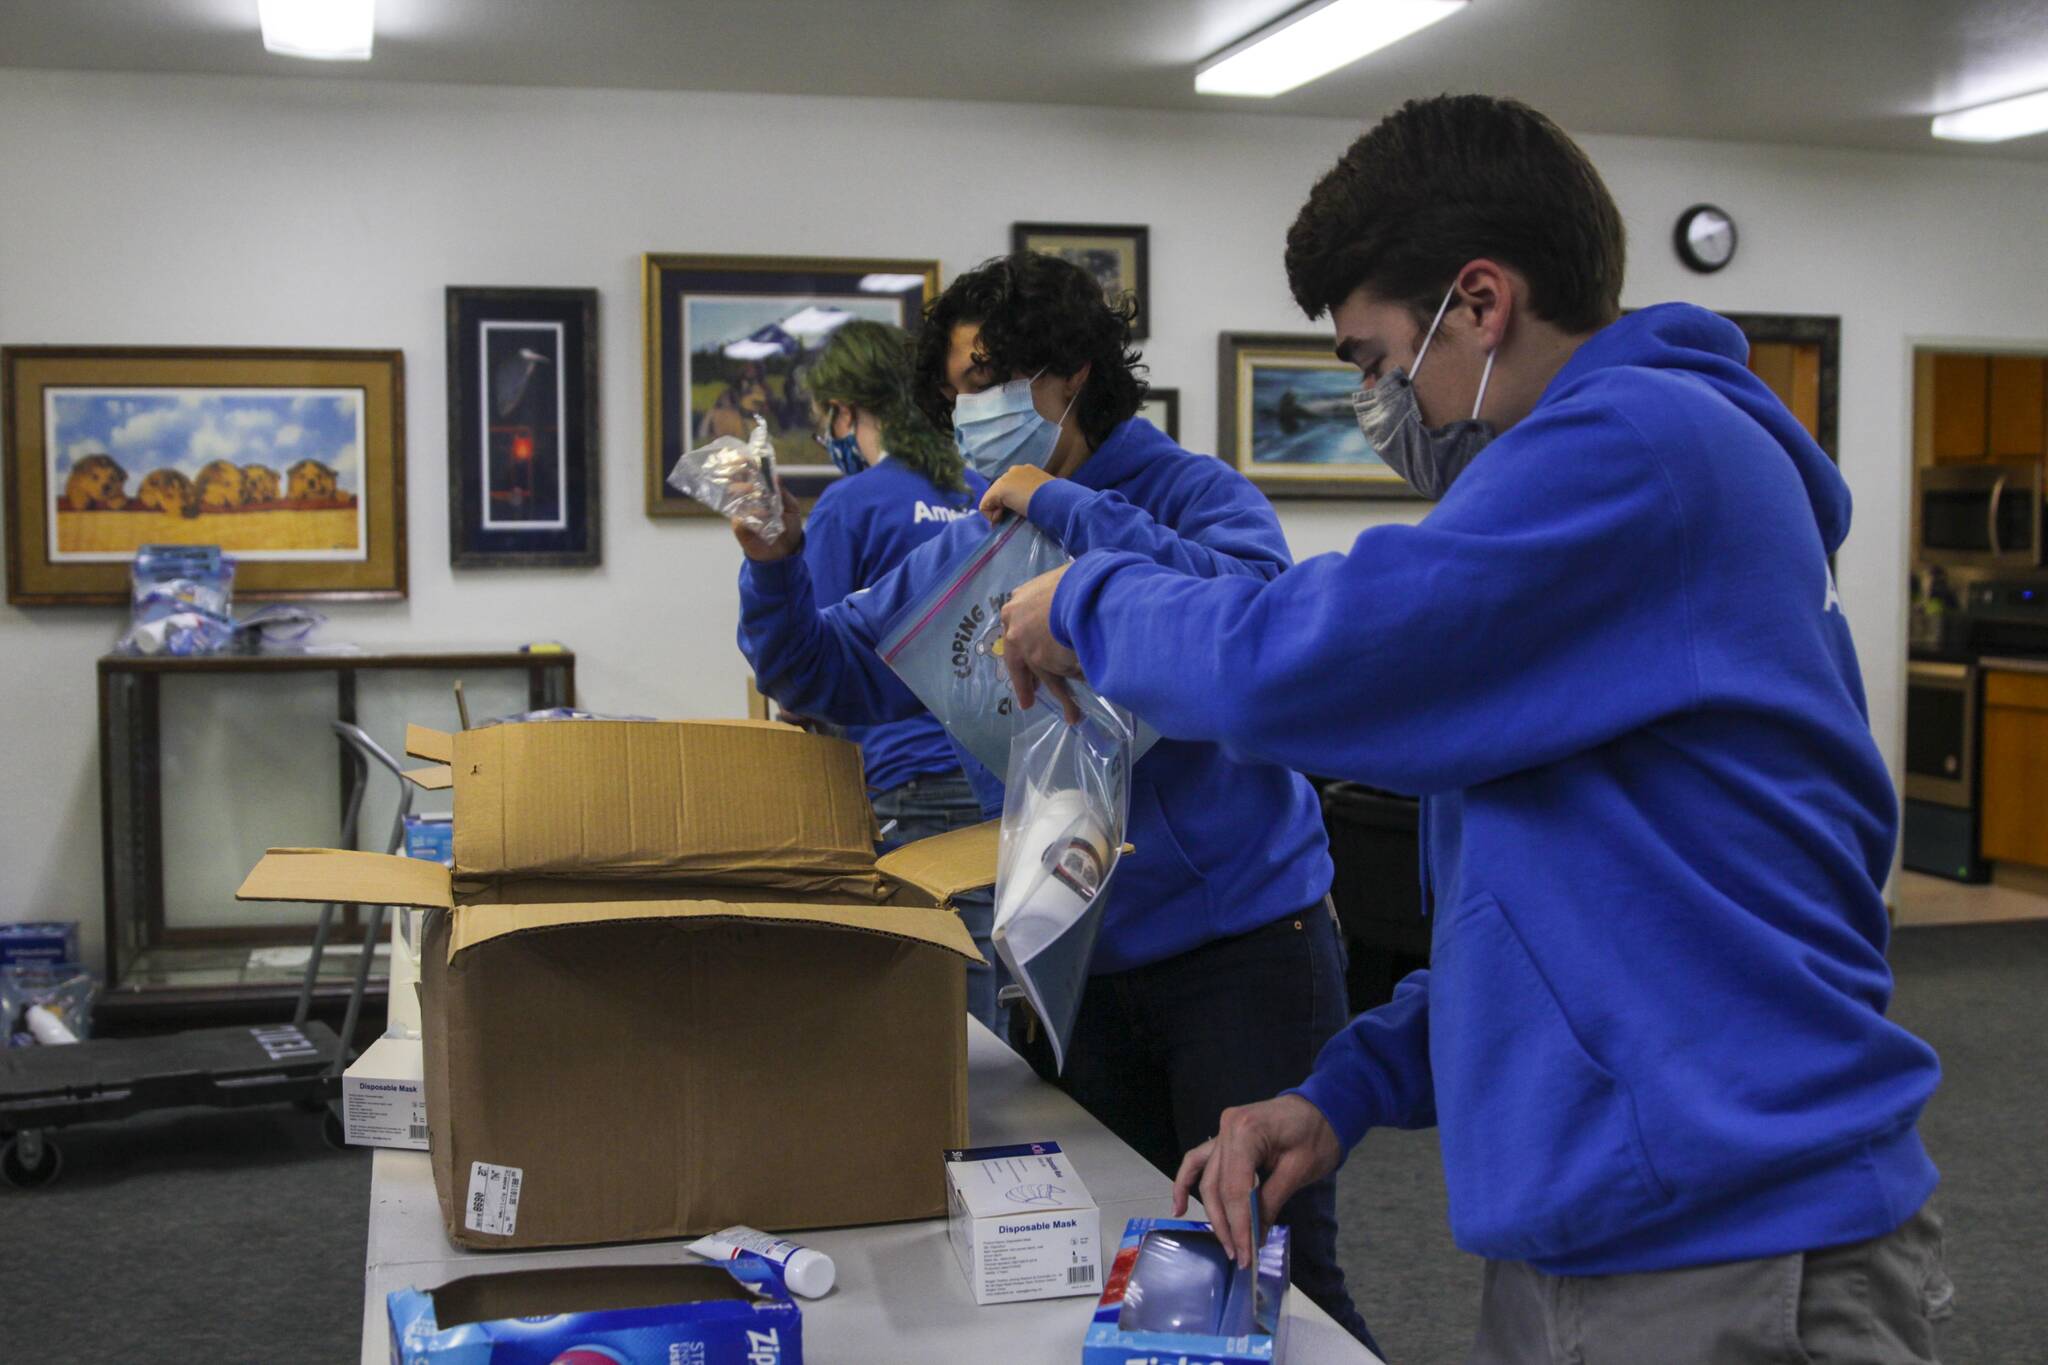 AmeriCorps members pack emergency preparedness kits for Central Council of Tlingit and Haida Indian Tribes of Alaska’s Tribal Emergency Operations Center as part of a day of service on Sept. 10, 2021. (Michael S. Lockett / Juneau Empire)